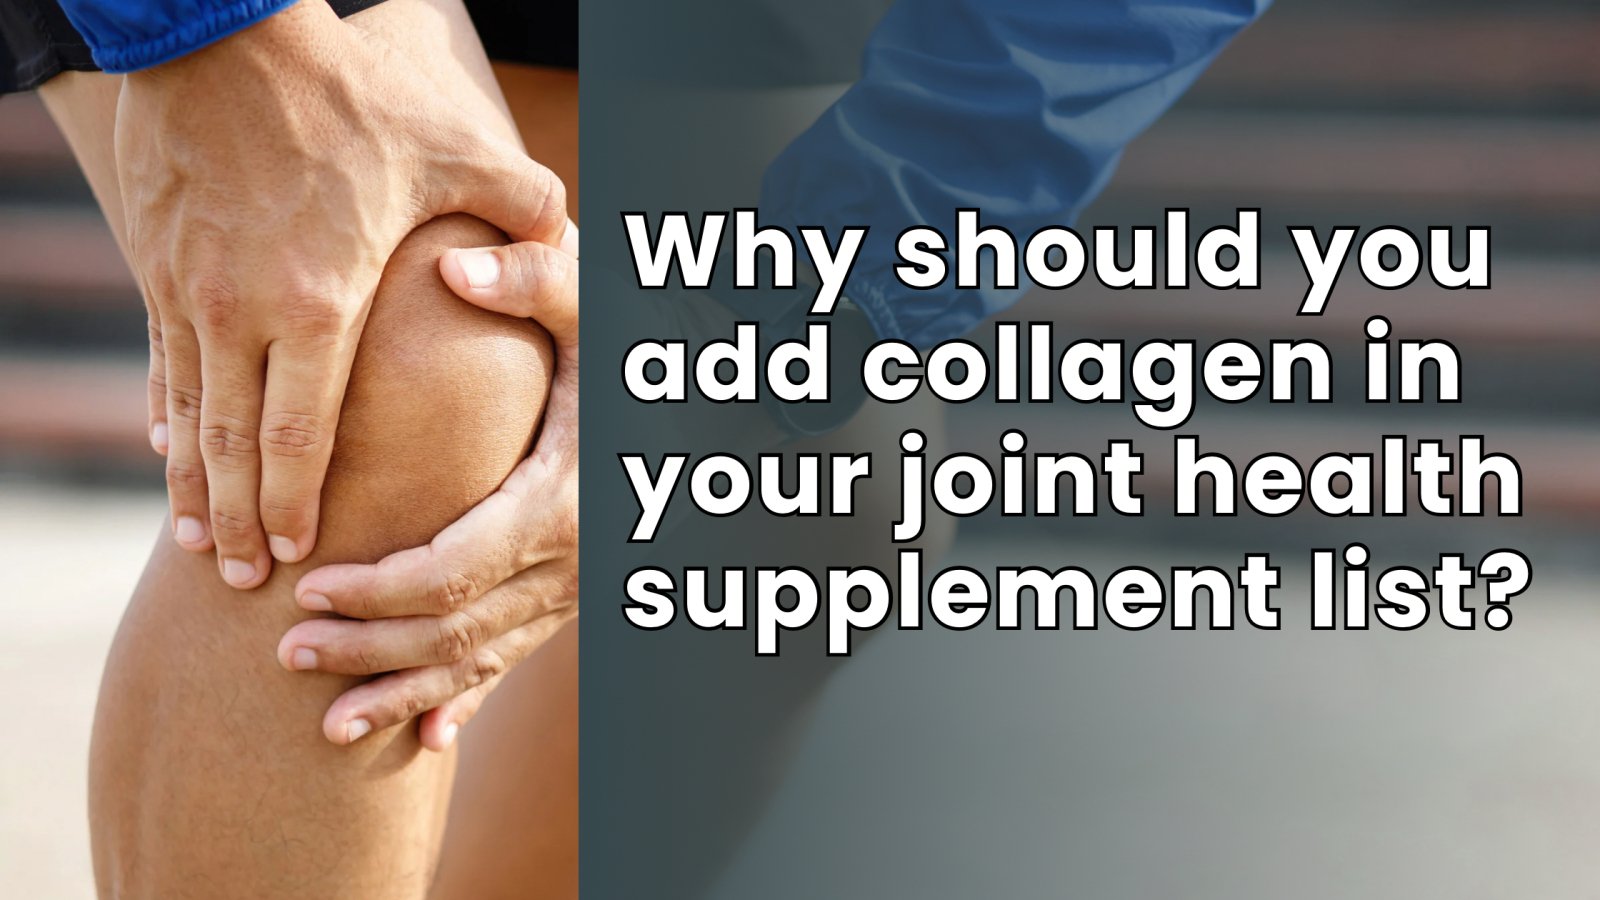 Why should you add collagen to your list of joint health supplements? - Wellvis Health Nutrition